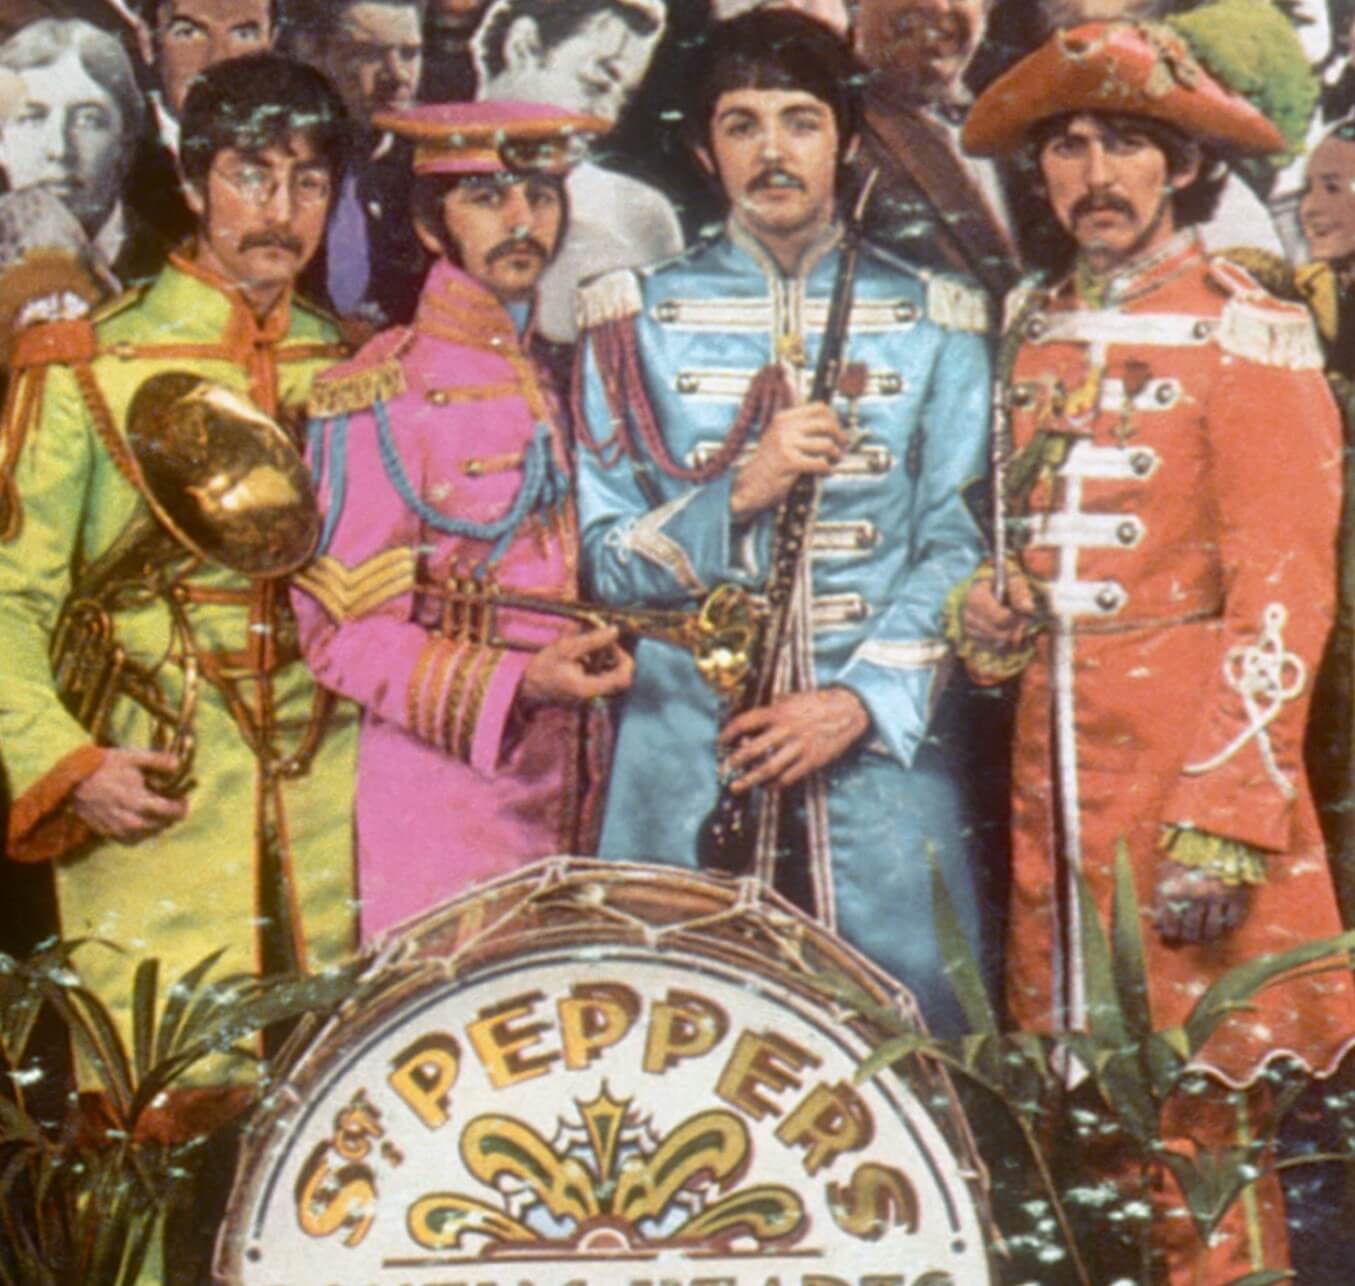 The Beatles on the 'Sgt. Pepper' cover